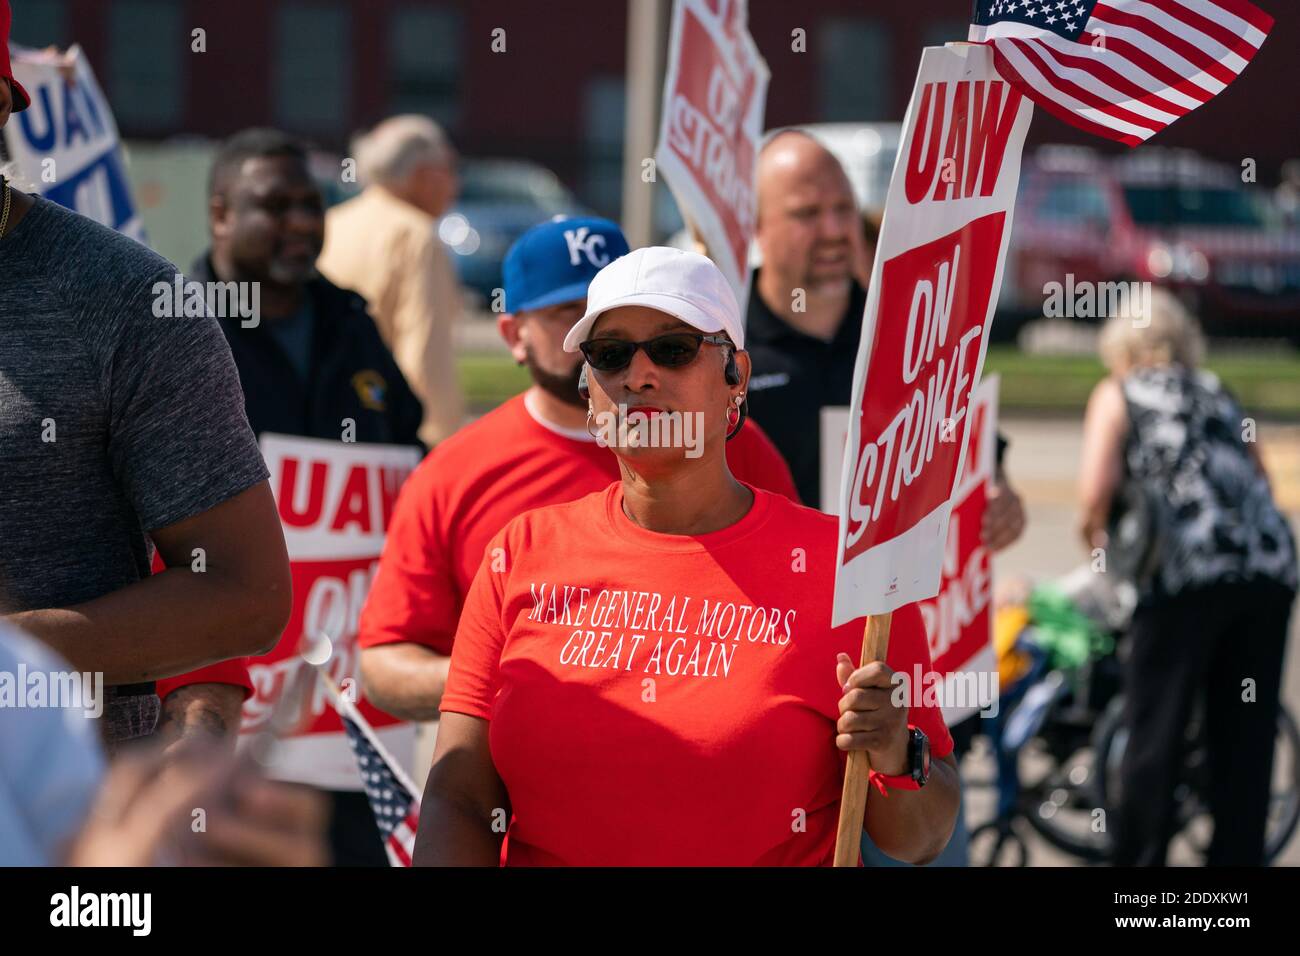 KANSAS CITY, KS, USA - 22 September 2019 - Joe Biden supporters listen to Joe Biden speaking during his visit to support a UAW (United Allied Workers Stock Photo